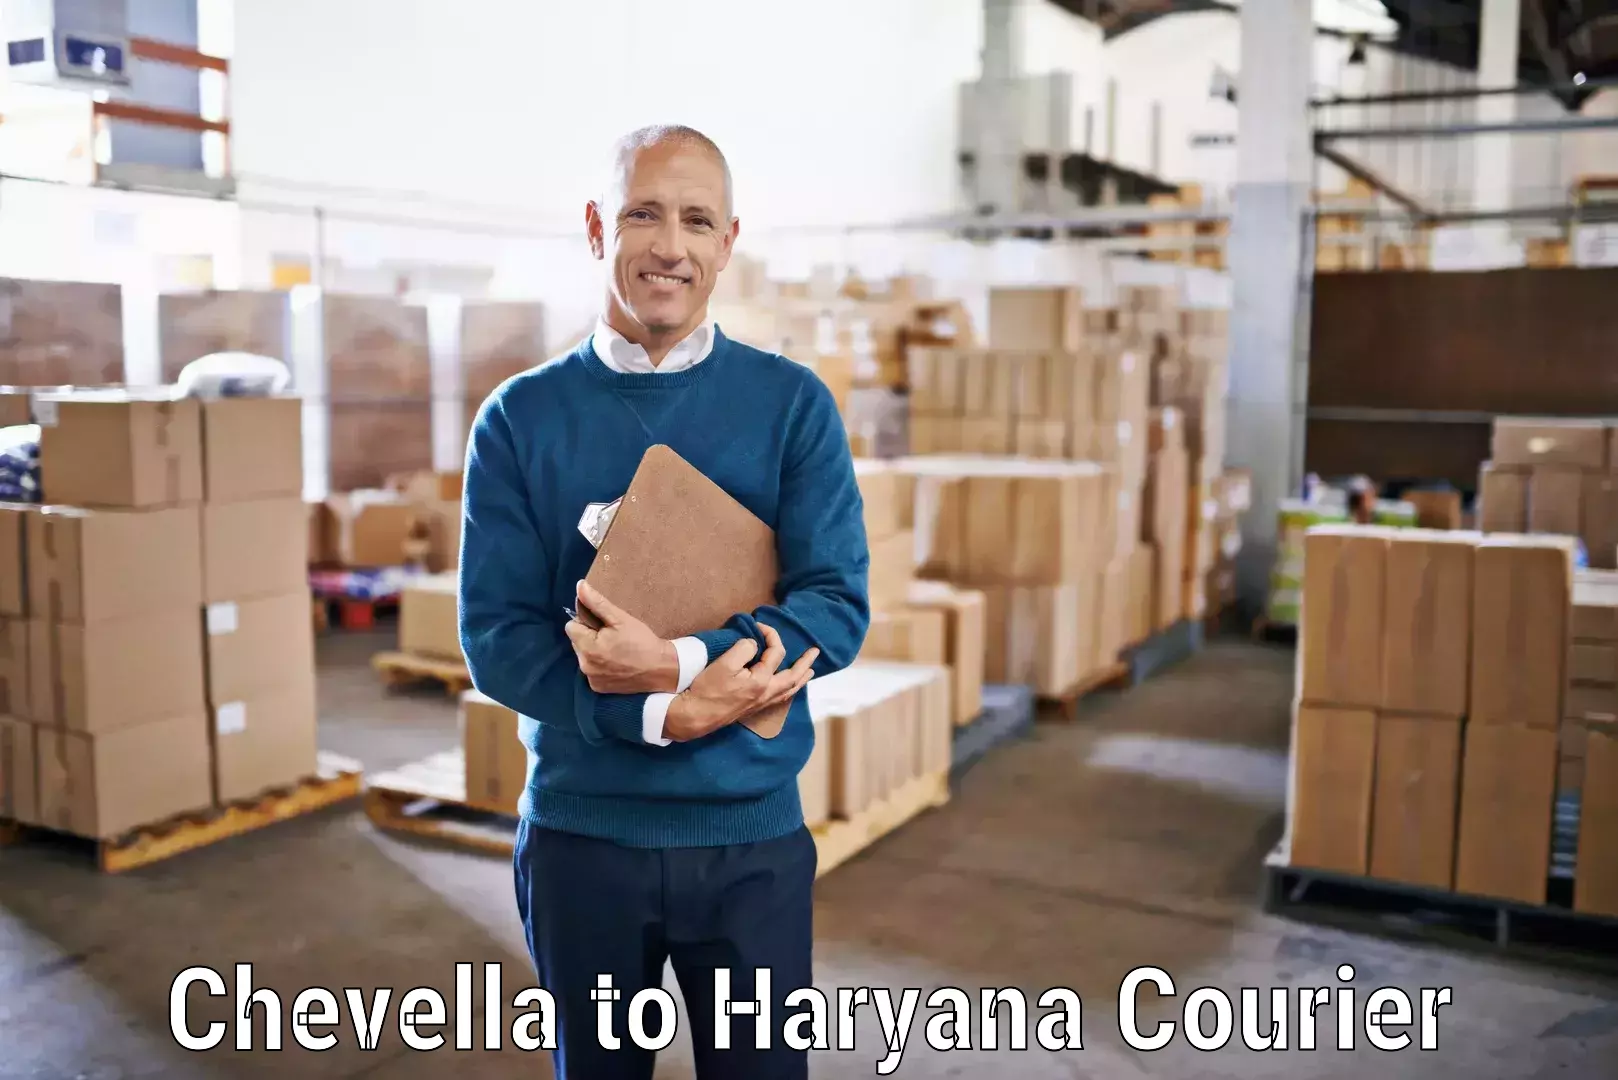 Efficient order fulfillment in Chevella to Odhan